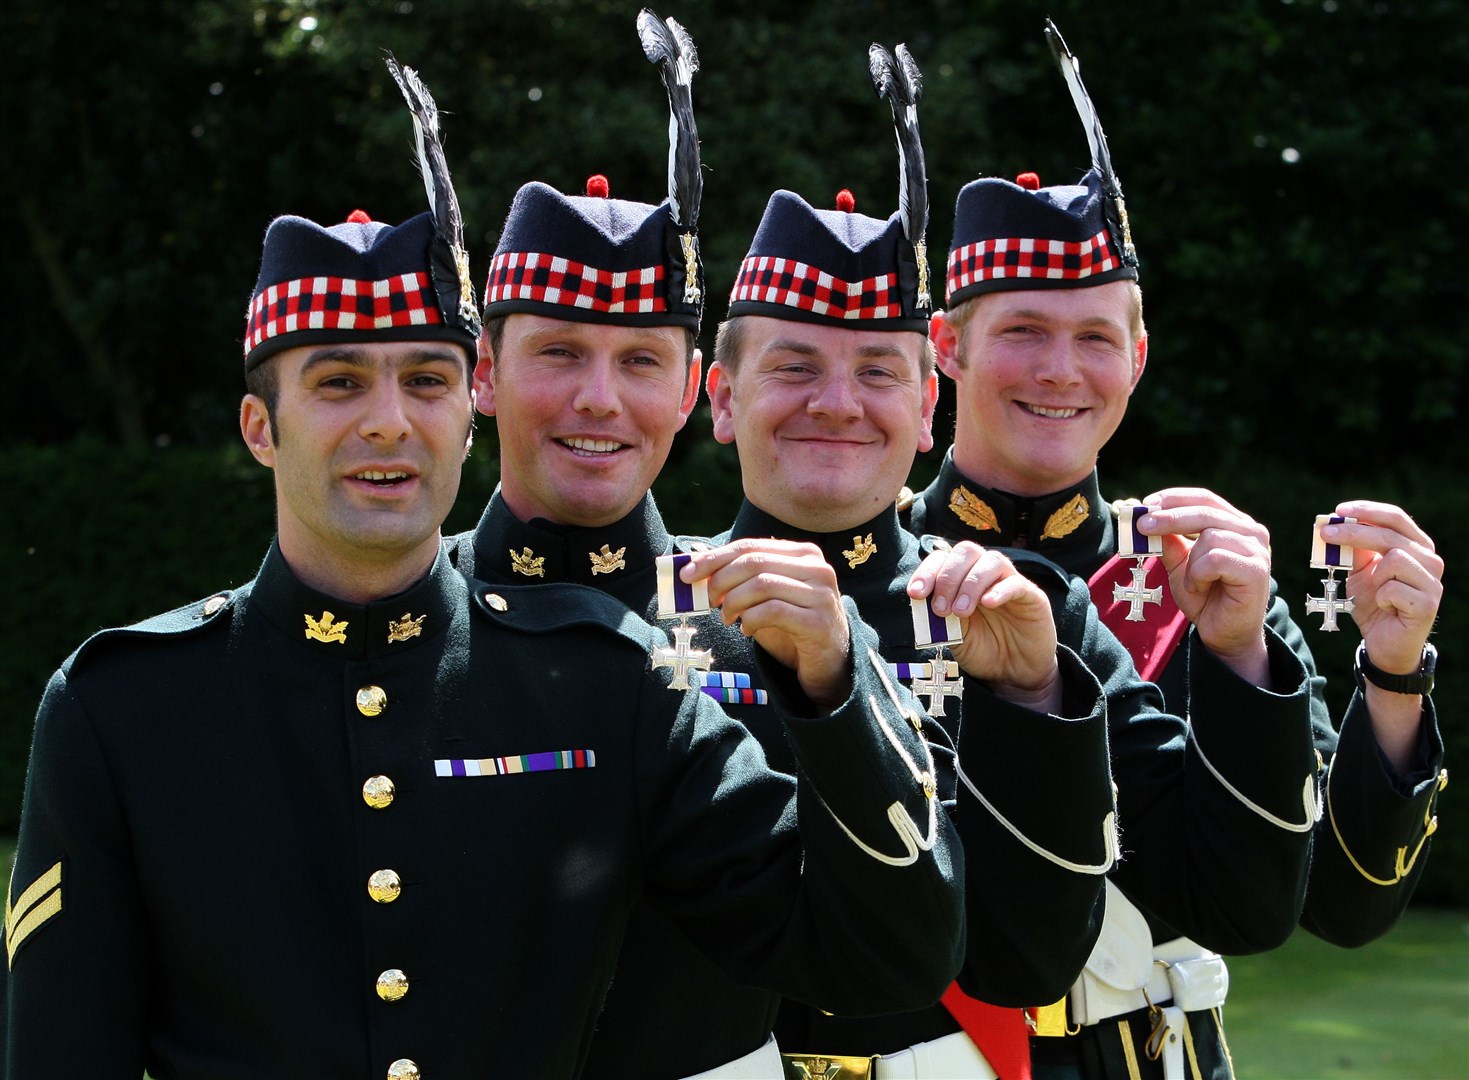 (left – right) Corporal Christopher Reynolds, Corporal Craig Sharp, Corporal Richard Clark and Lieutenant Alexander Phillips of The Royal Regiment of Scotland, who all received the Military Cross from Queen Elizabeth II at an Investiture at the Palace of Holyroodhouse (Andrew Milligan/PA)